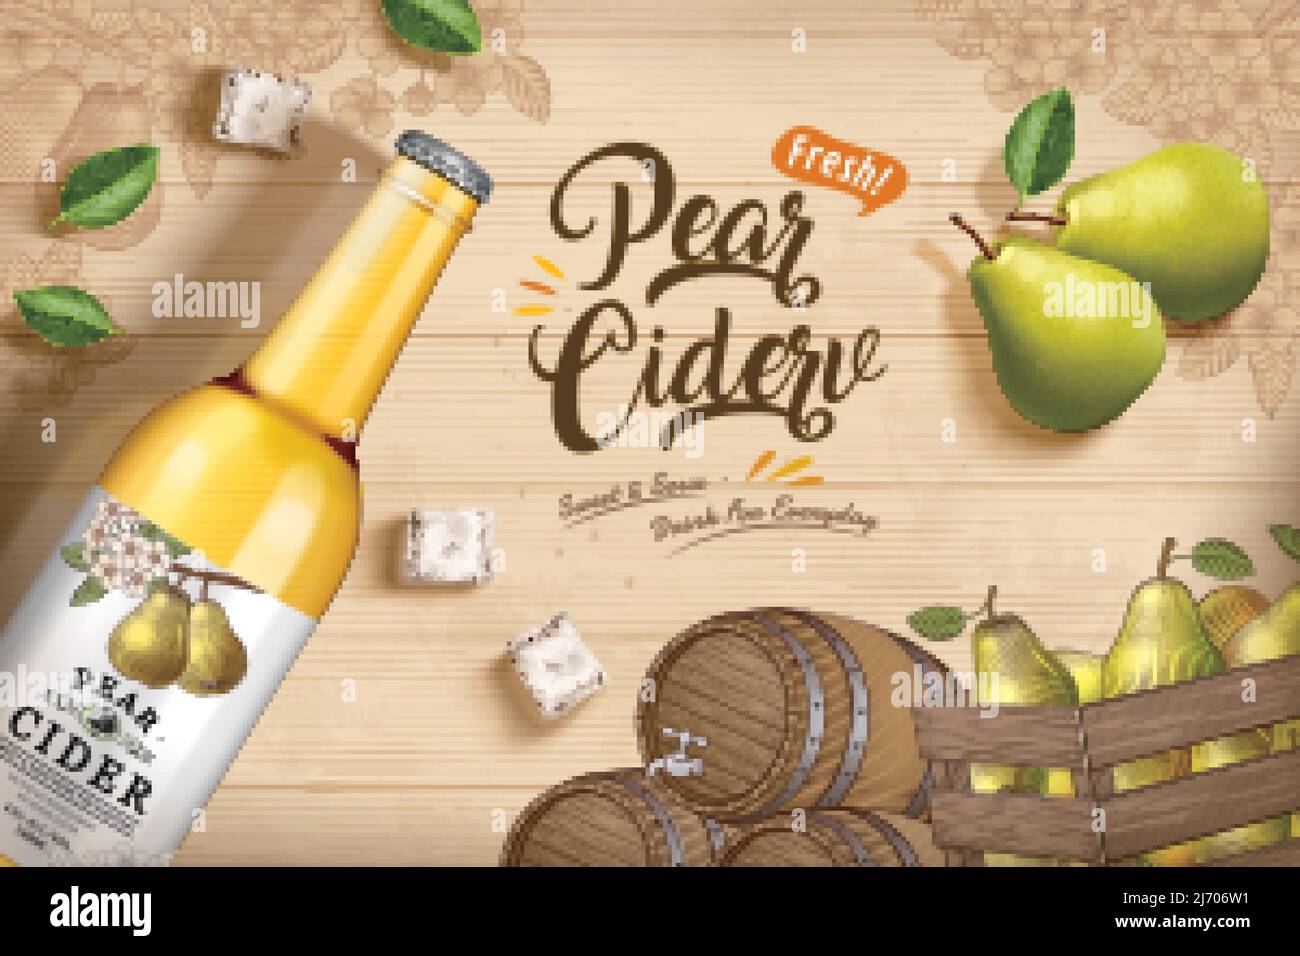 Pear cider banner ad. 3D Illustration of pear cider bottle with pears laid on an engraved background of wooden table decorated with pear branch Stock Vector